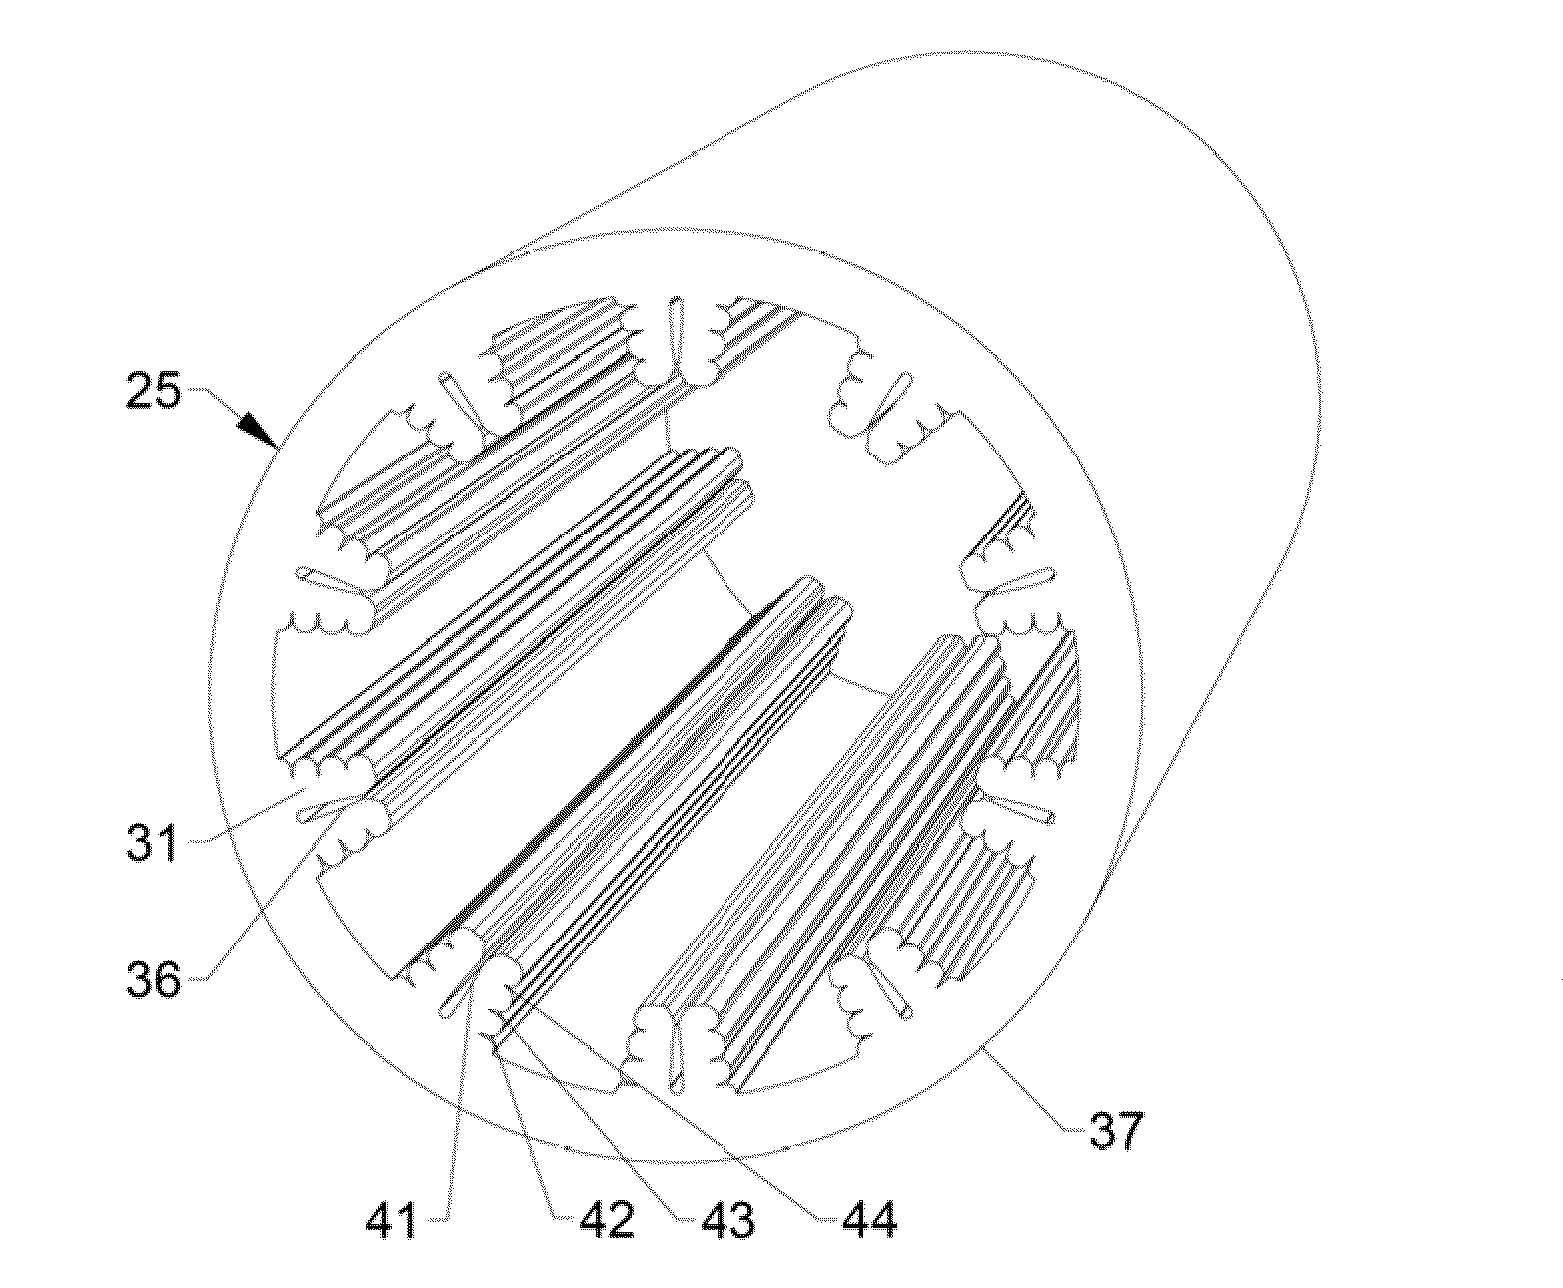 Internally finned tube having enhanced nucleation centers, heat exchangers, and methods of manufacture